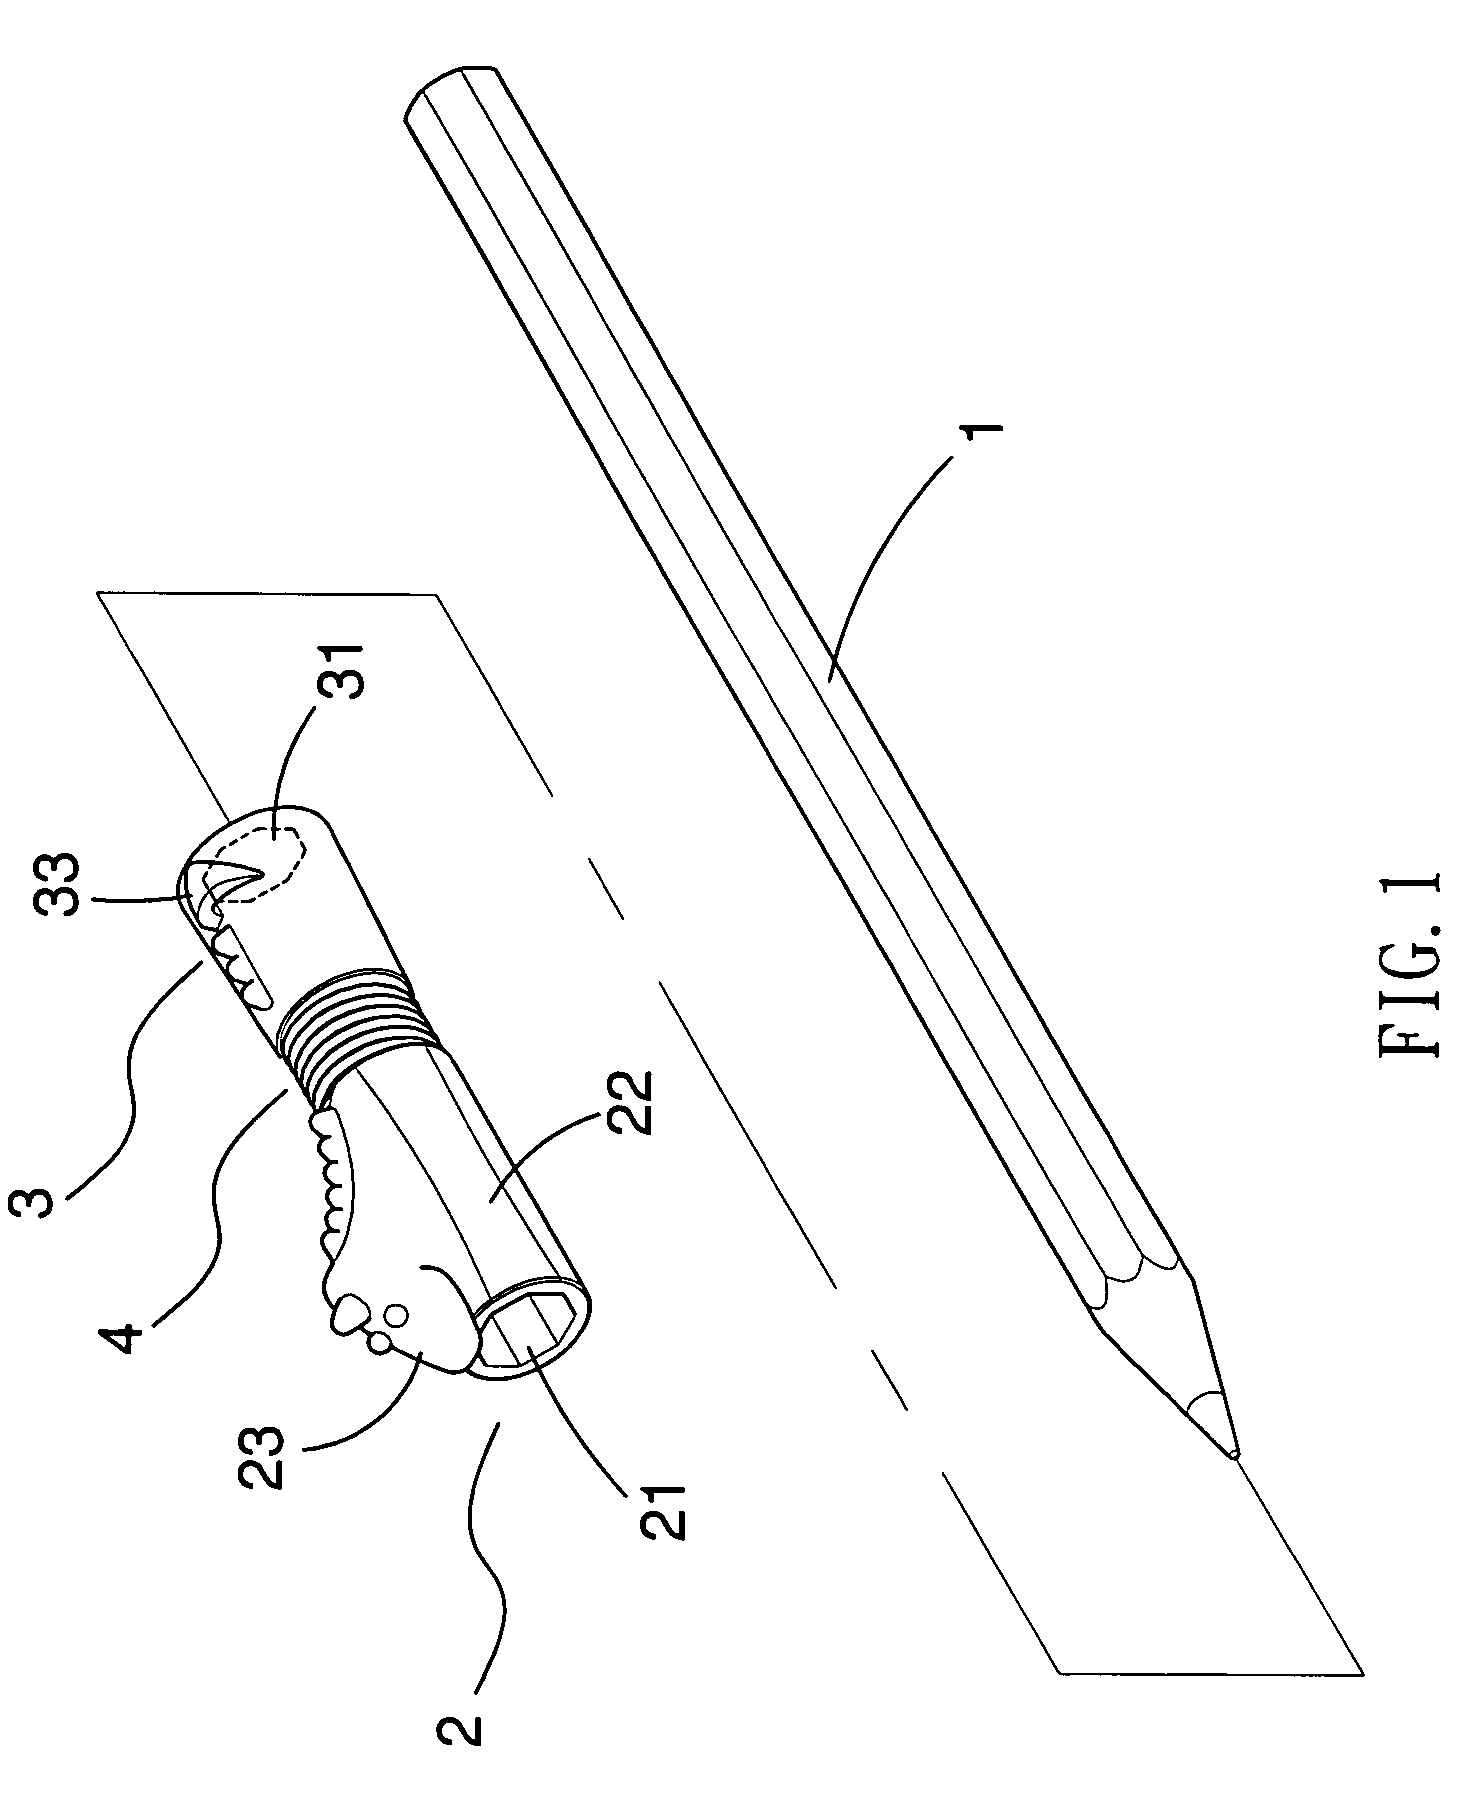 Adjustable dual sleeve pen holding auxiliary device